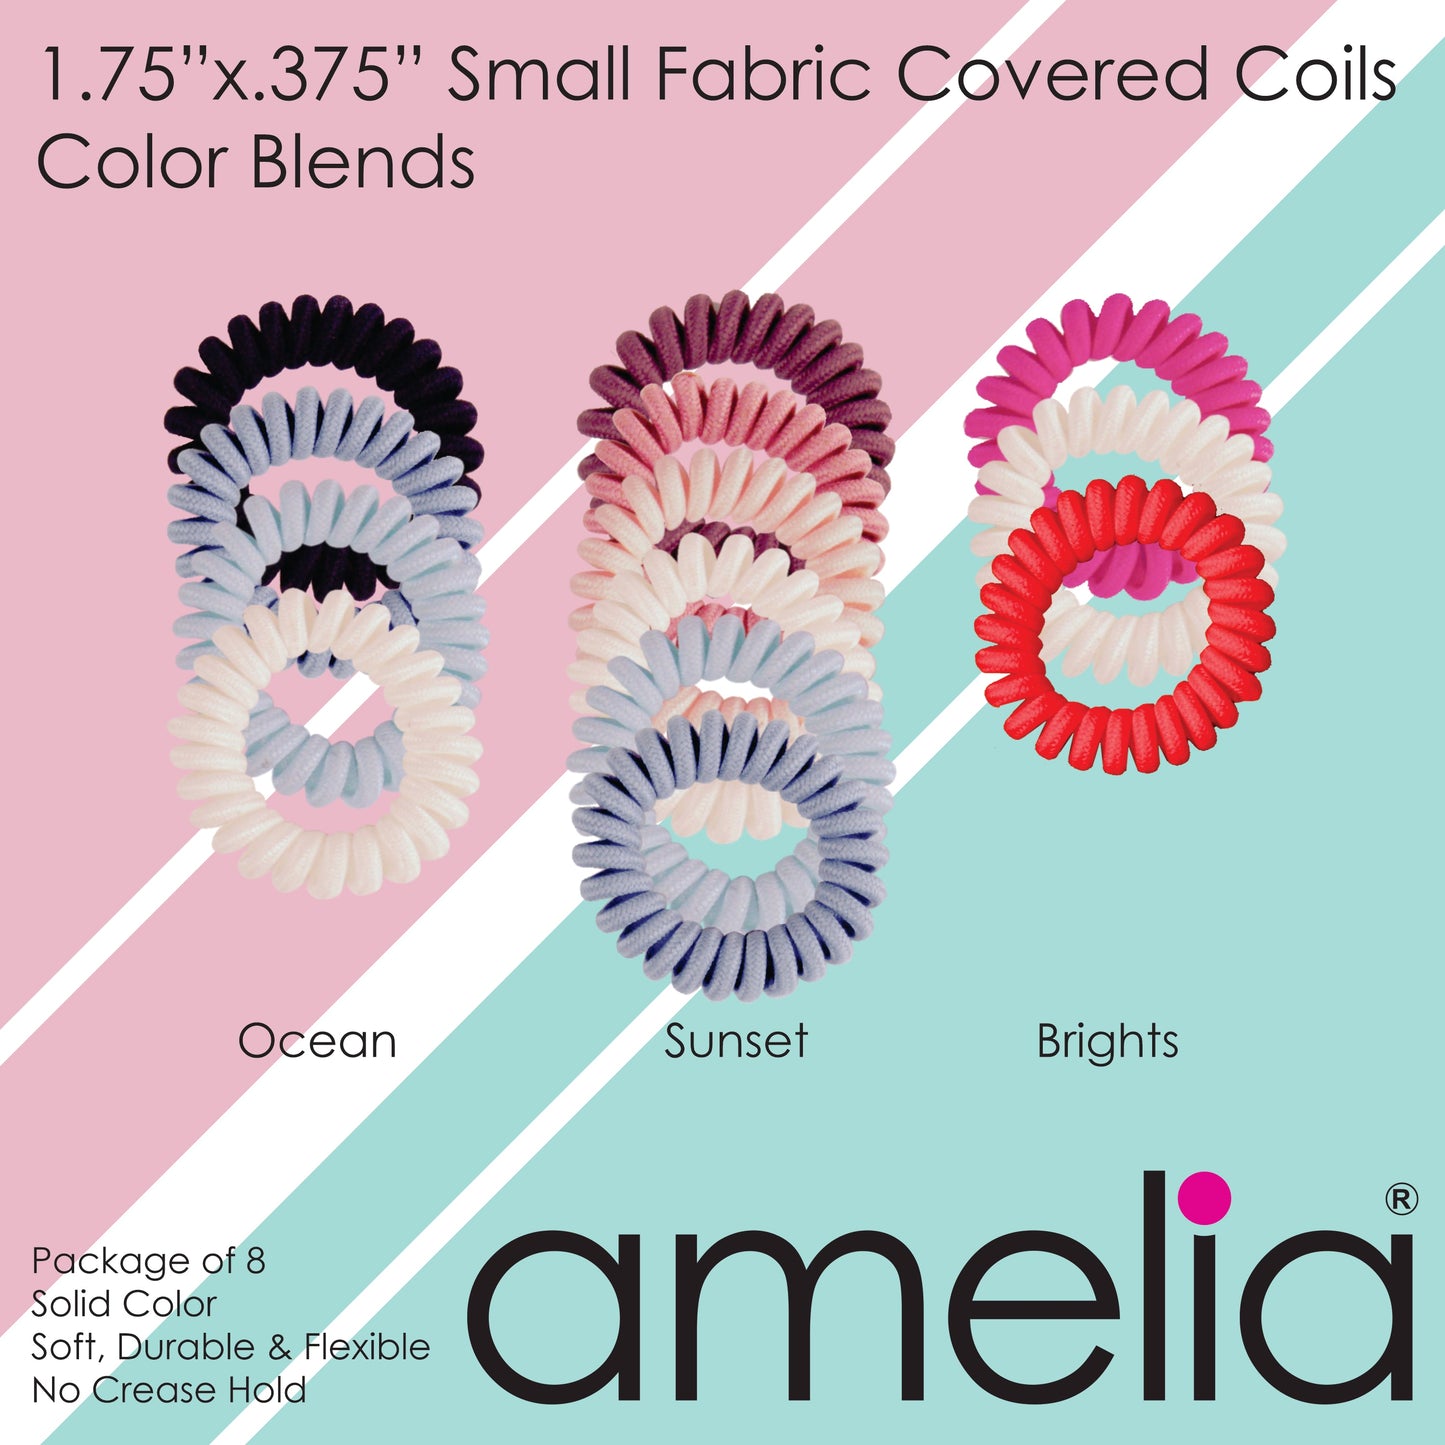 Amelia Beauty, 8 Small Fabric Wrapped Elastic Hair Coils, 1.75in Diameter Spiral Hair Ties, Gentle on Hair, Strong Hold and Minimizes Dents and Creases, Neutral Tones